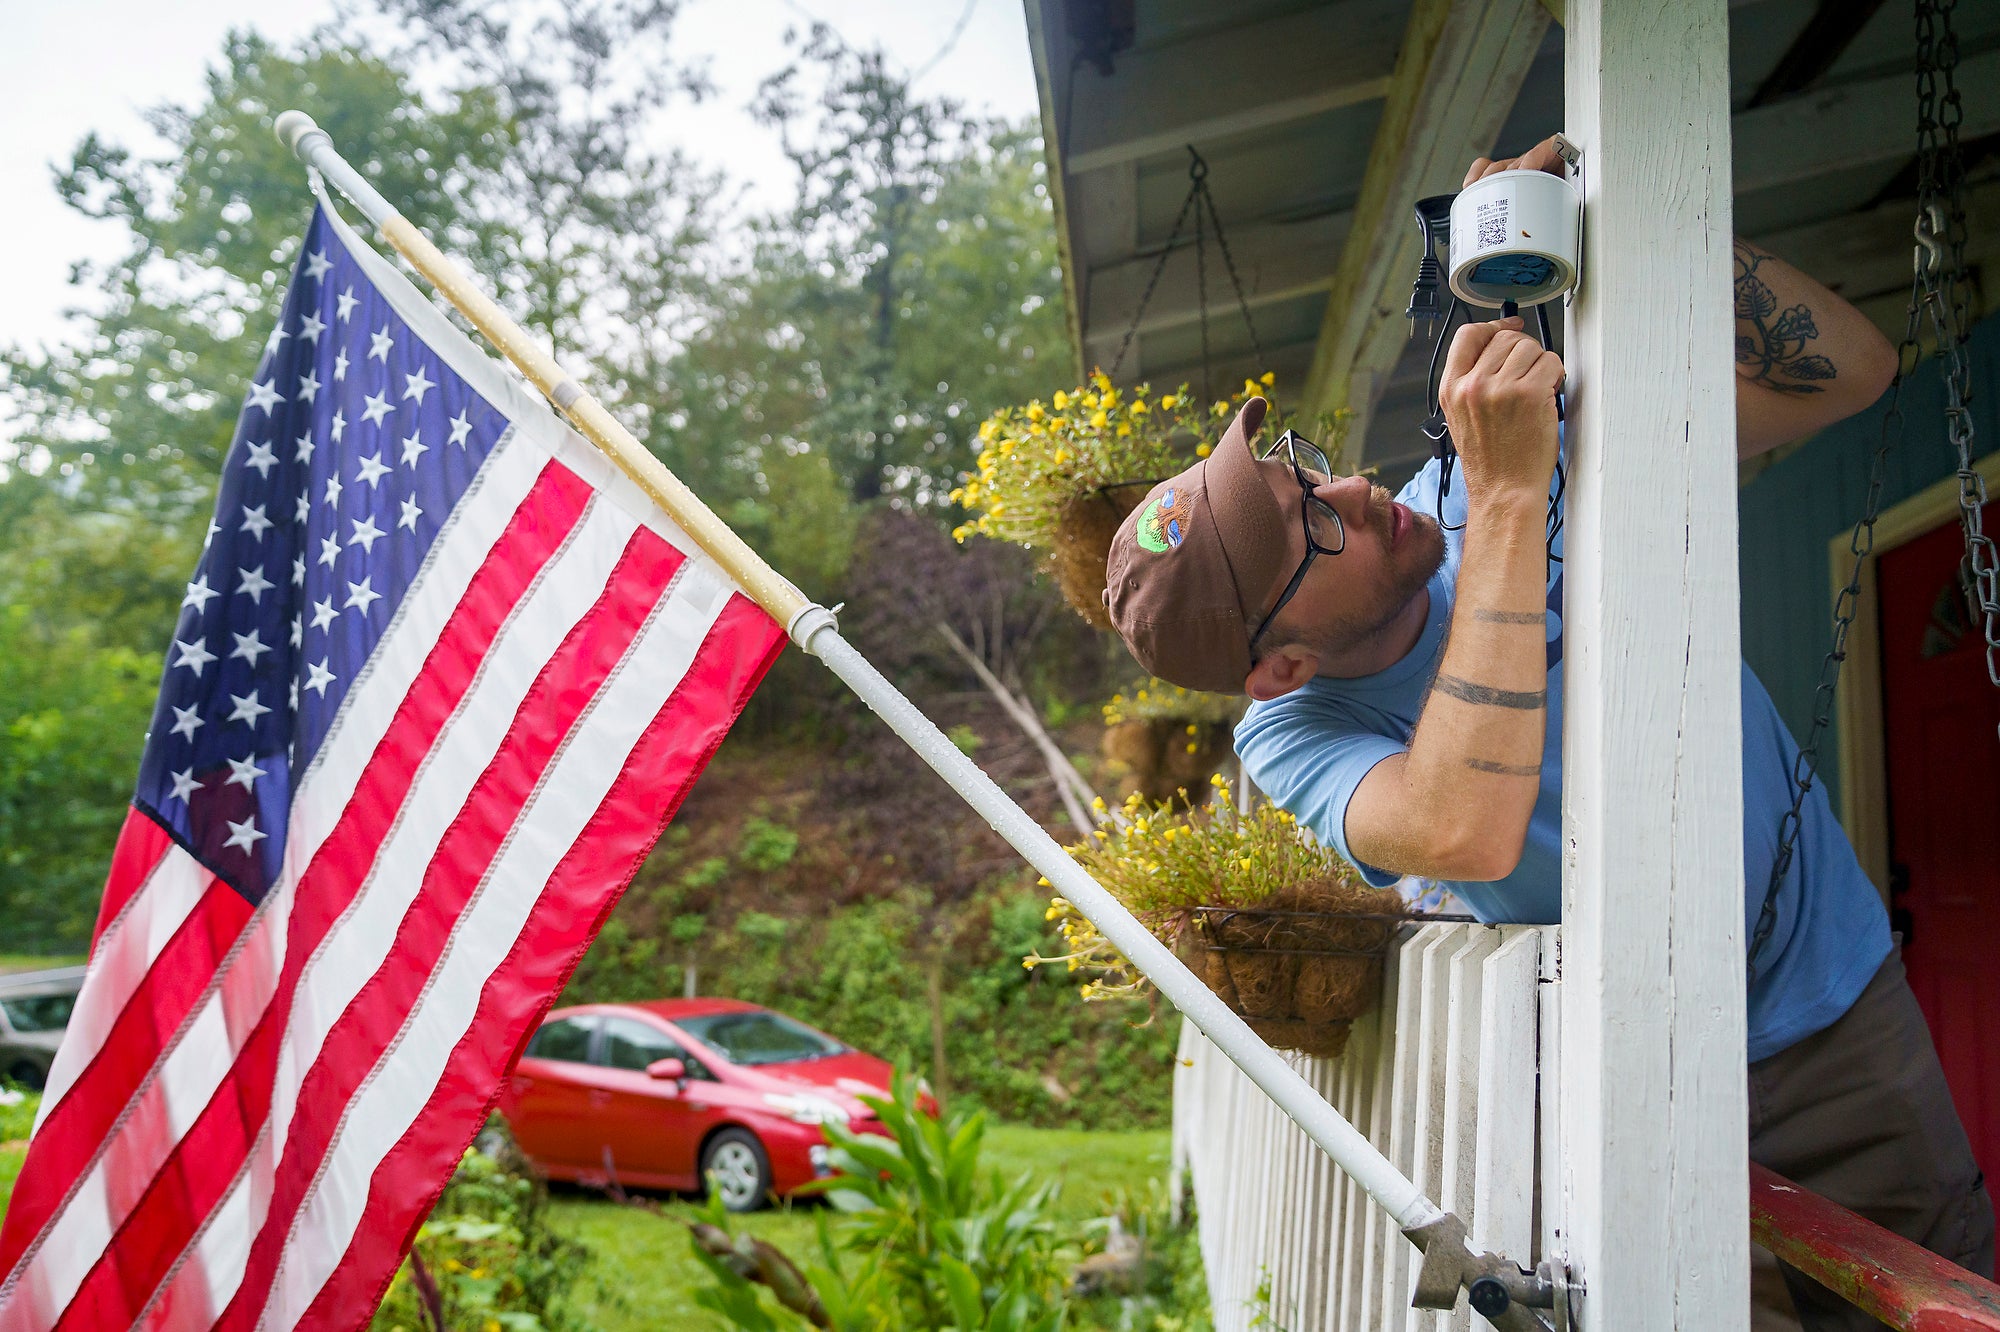 A man putting a small white monitor on the front porch of a home with a large American flag on it.